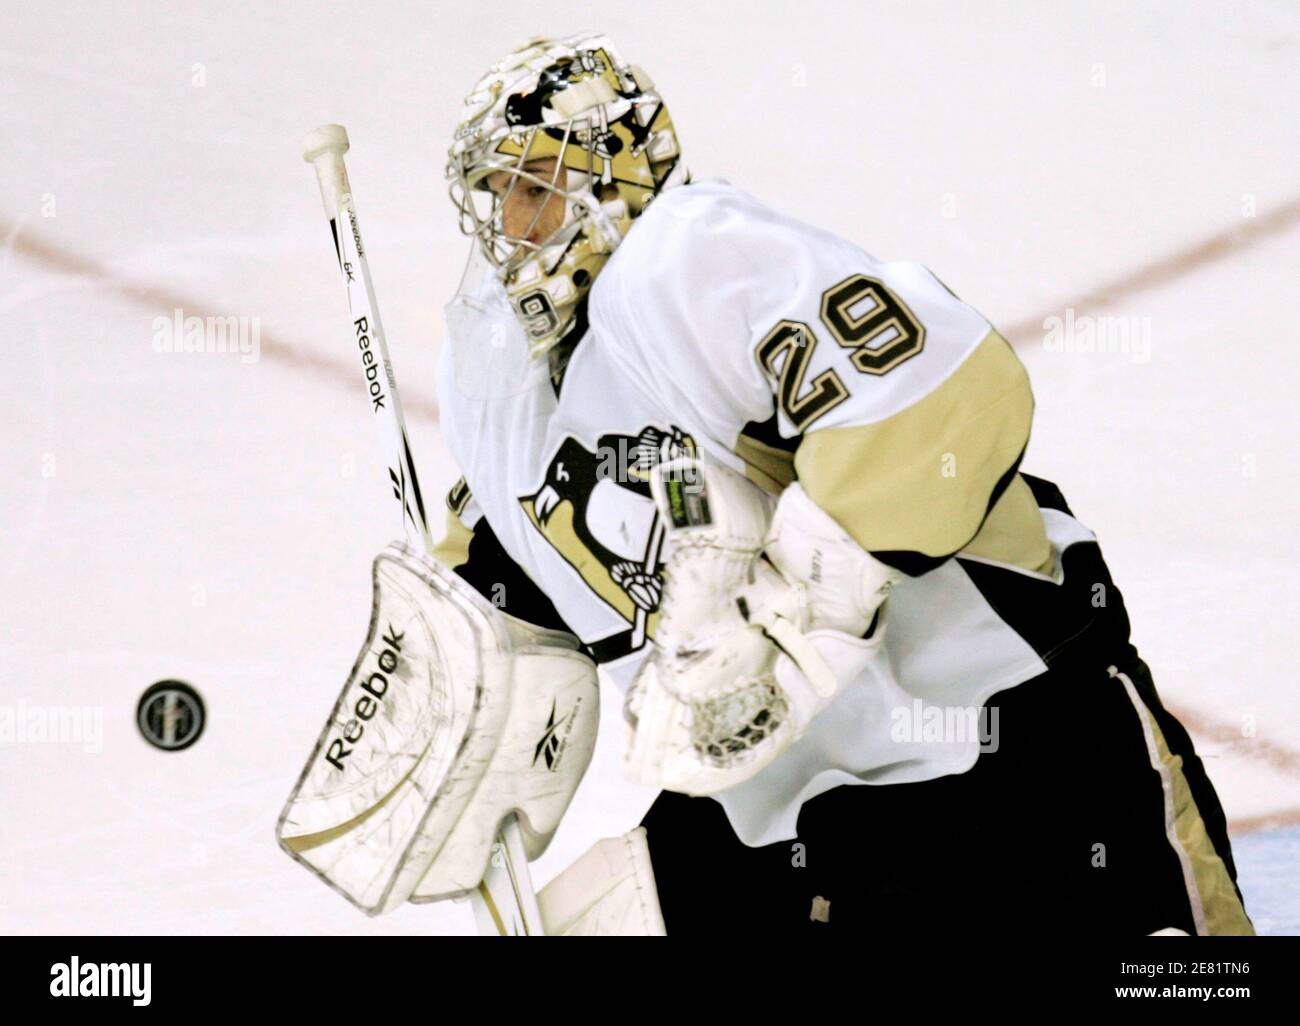 Pittsburgh Penguins goalie Marc-Andre Fleury eyes the puck in the second period of their NHL hockey game against the Washington Capitals in Washington March 8, 2009.    REUTERS/Gary Cameron    (UNITED STATES) Stock Photo